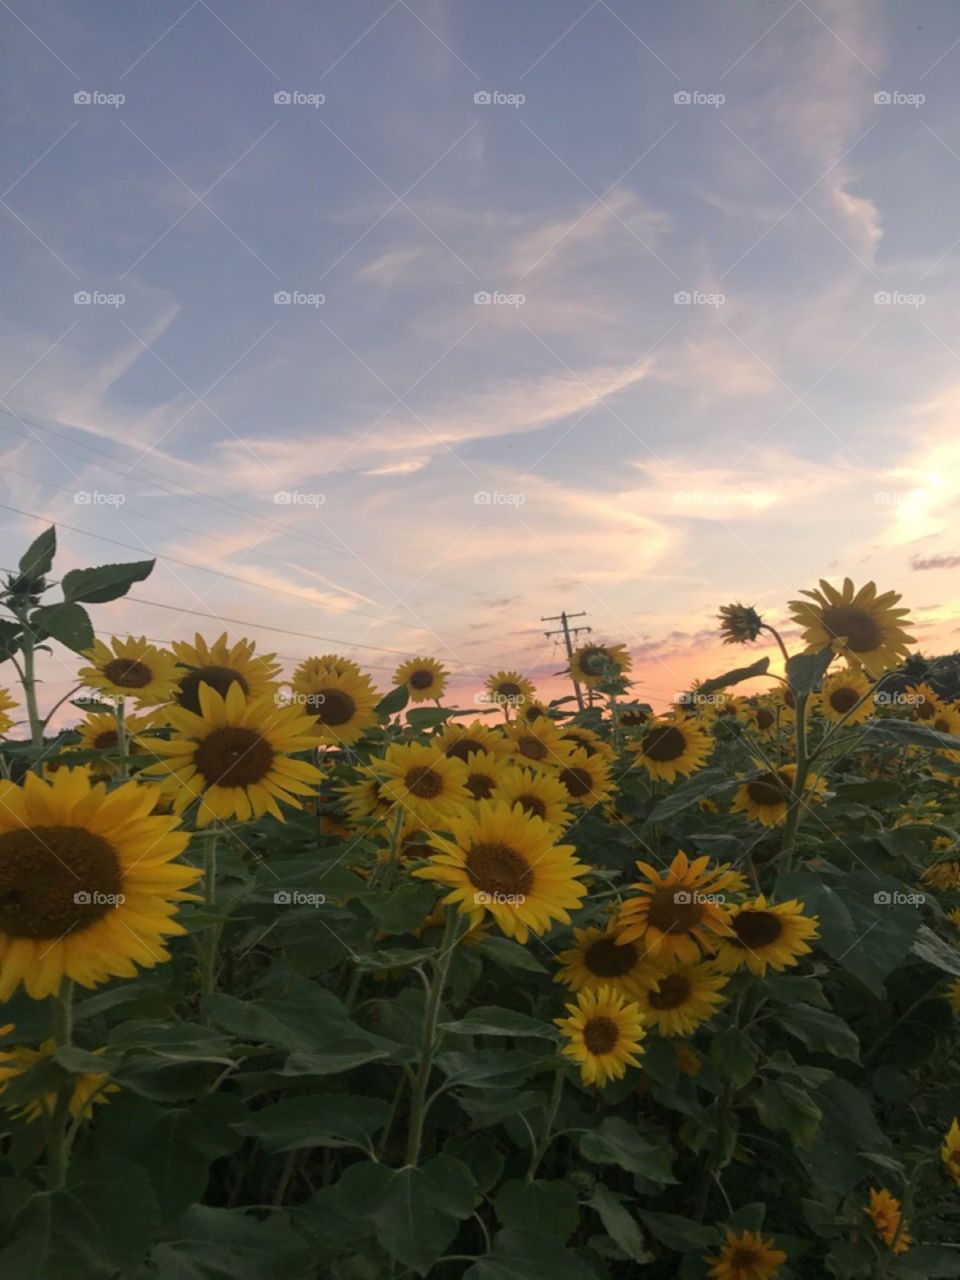 Yellow and vibrant petals of the multitude of sunflowers in this sunflower patch dance against the contrast of a pastel sunset.